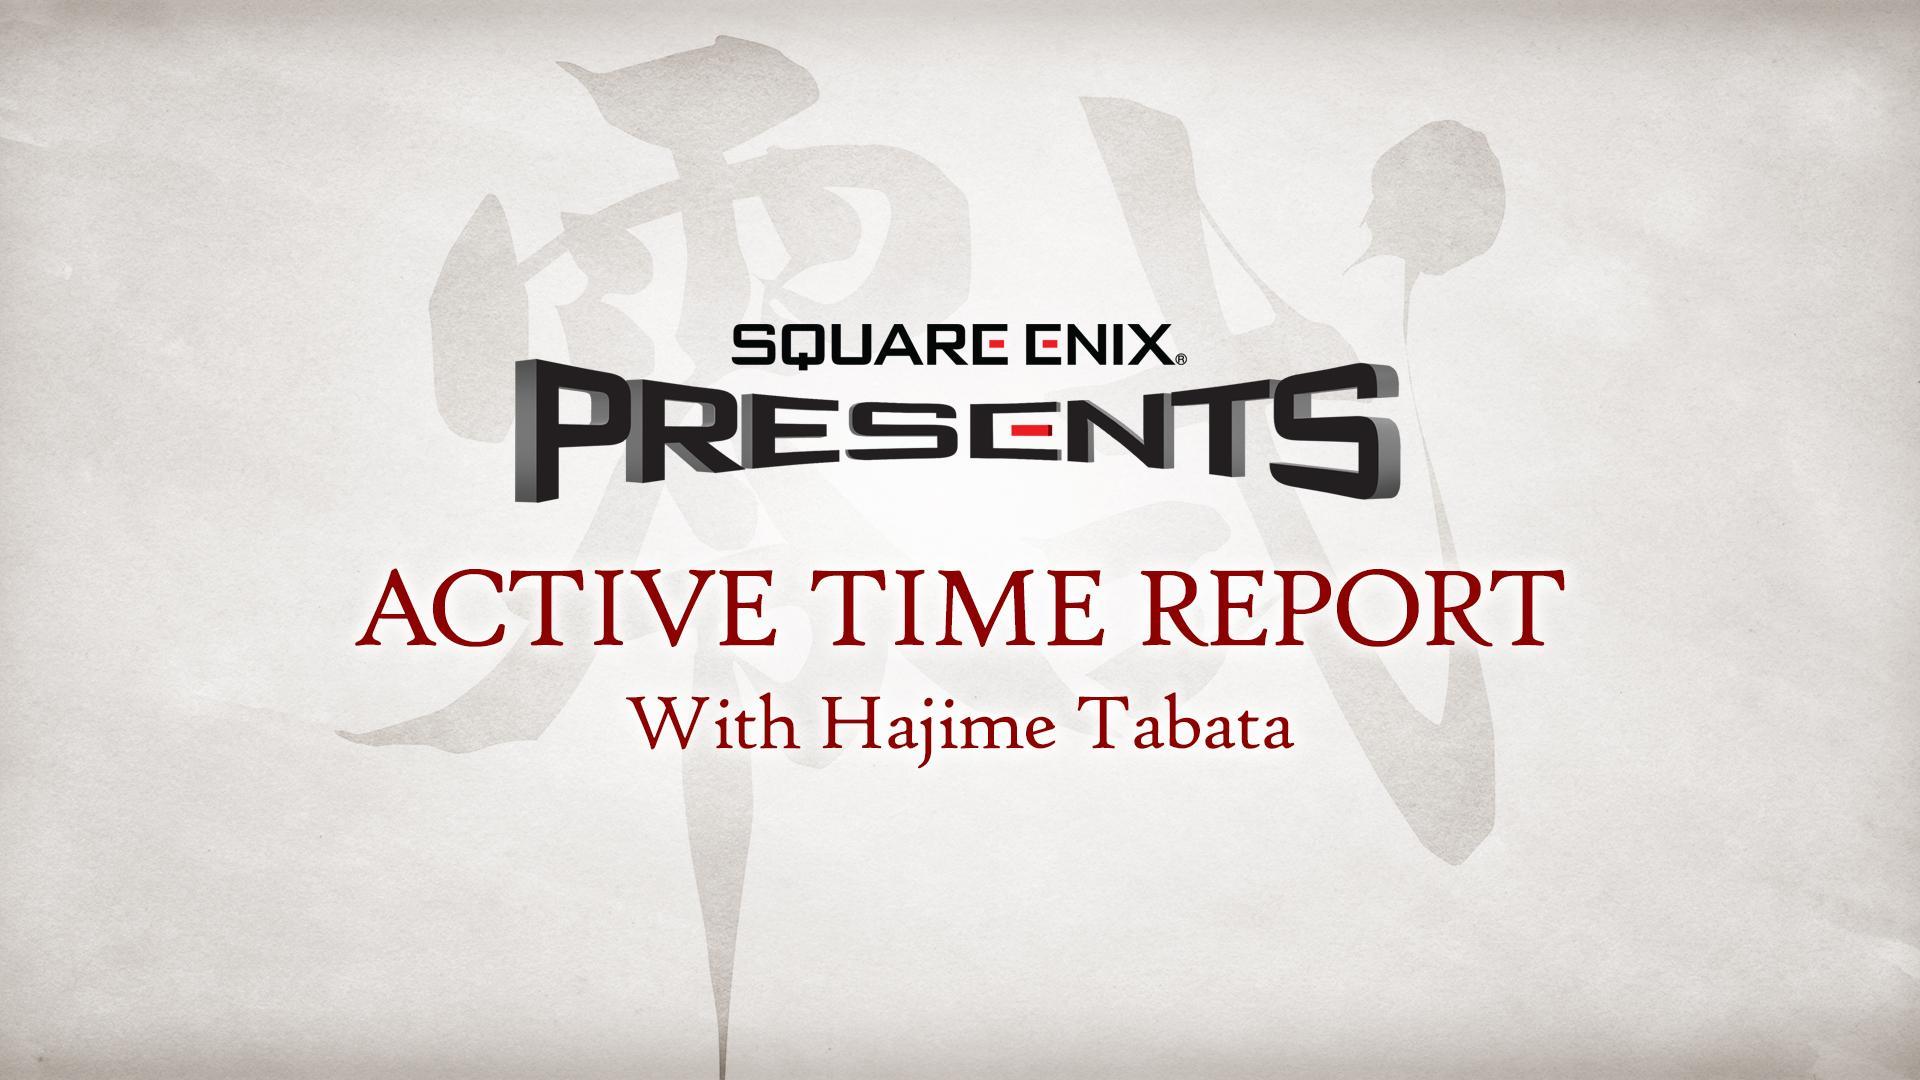 What Square’s New Active Time Report Revealed